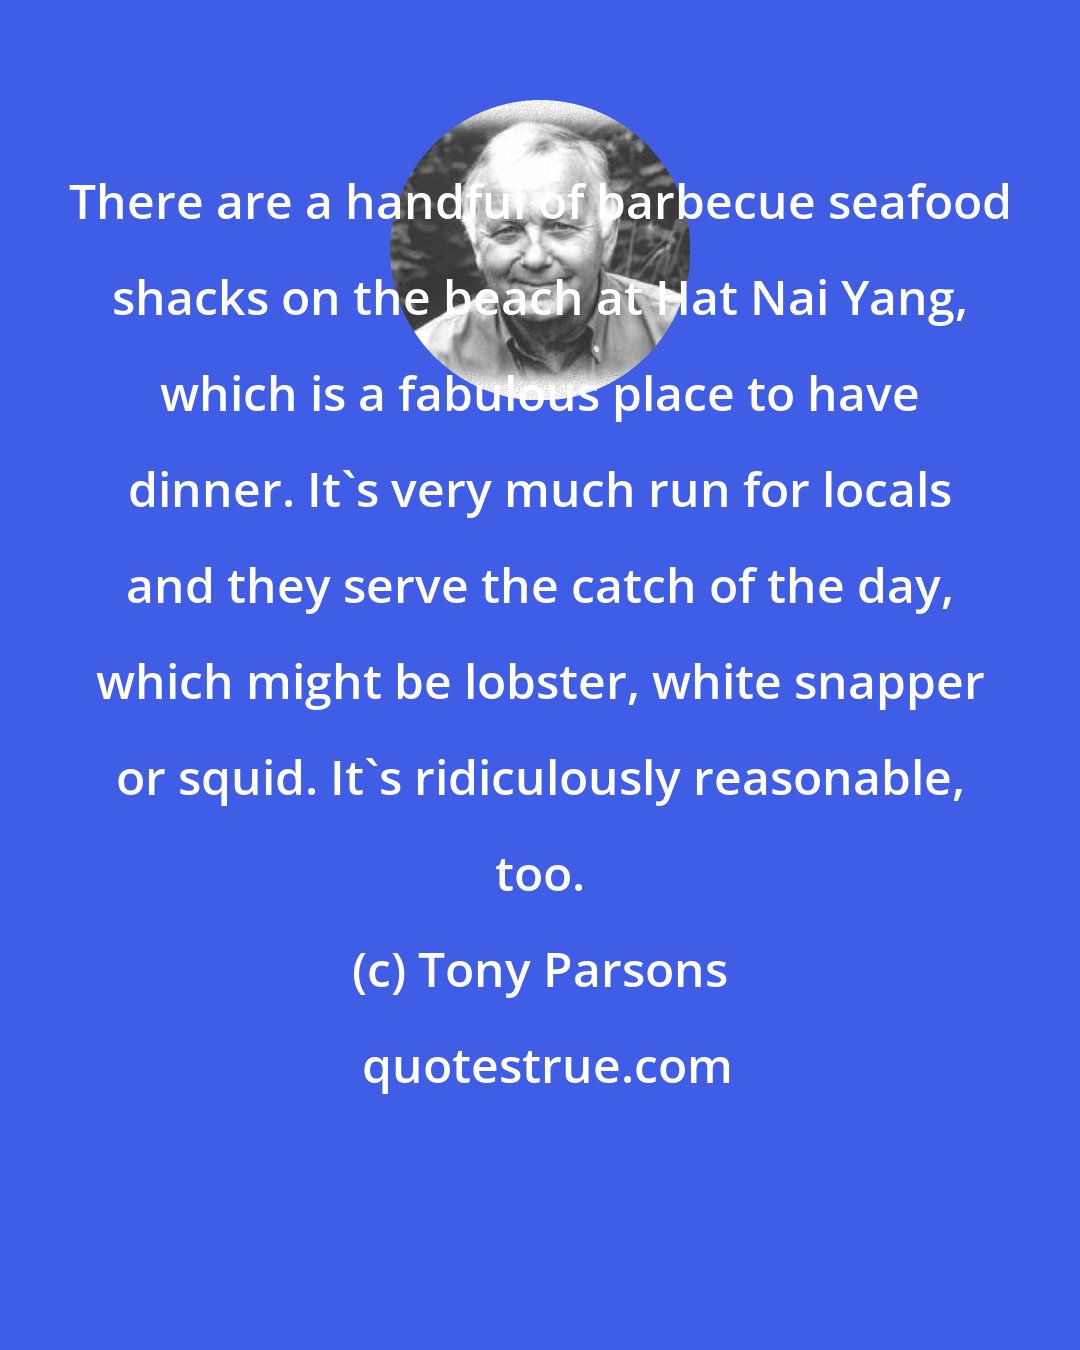 Tony Parsons: There are a handful of barbecue seafood shacks on the beach at Hat Nai Yang, which is a fabulous place to have dinner. It's very much run for locals and they serve the catch of the day, which might be lobster, white snapper or squid. It's ridiculously reasonable, too.